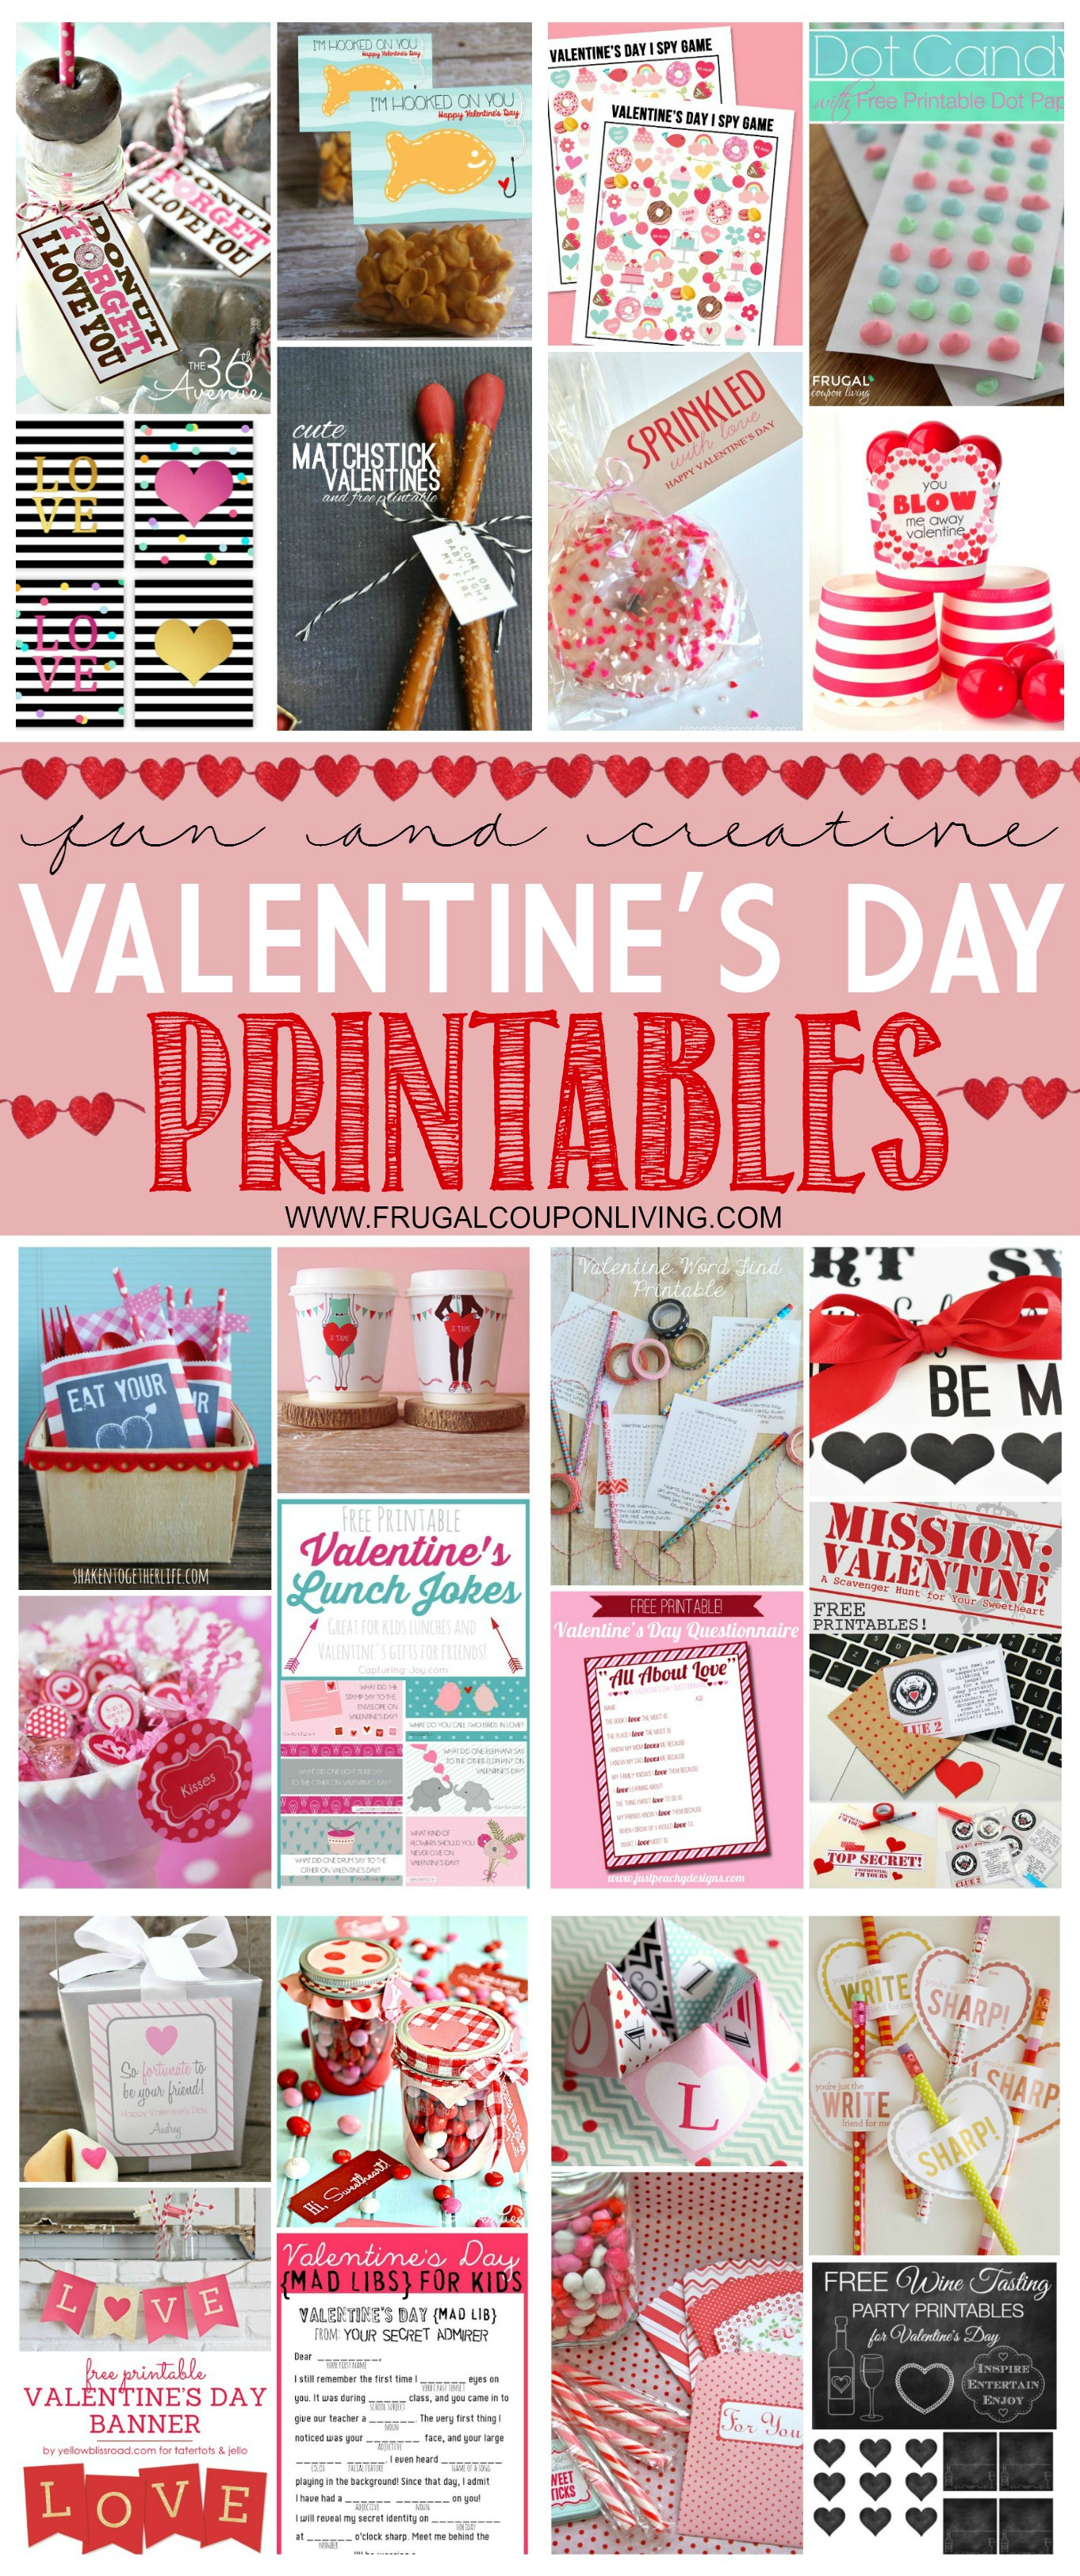 Valentines-day-printables-frugal-coupon-living